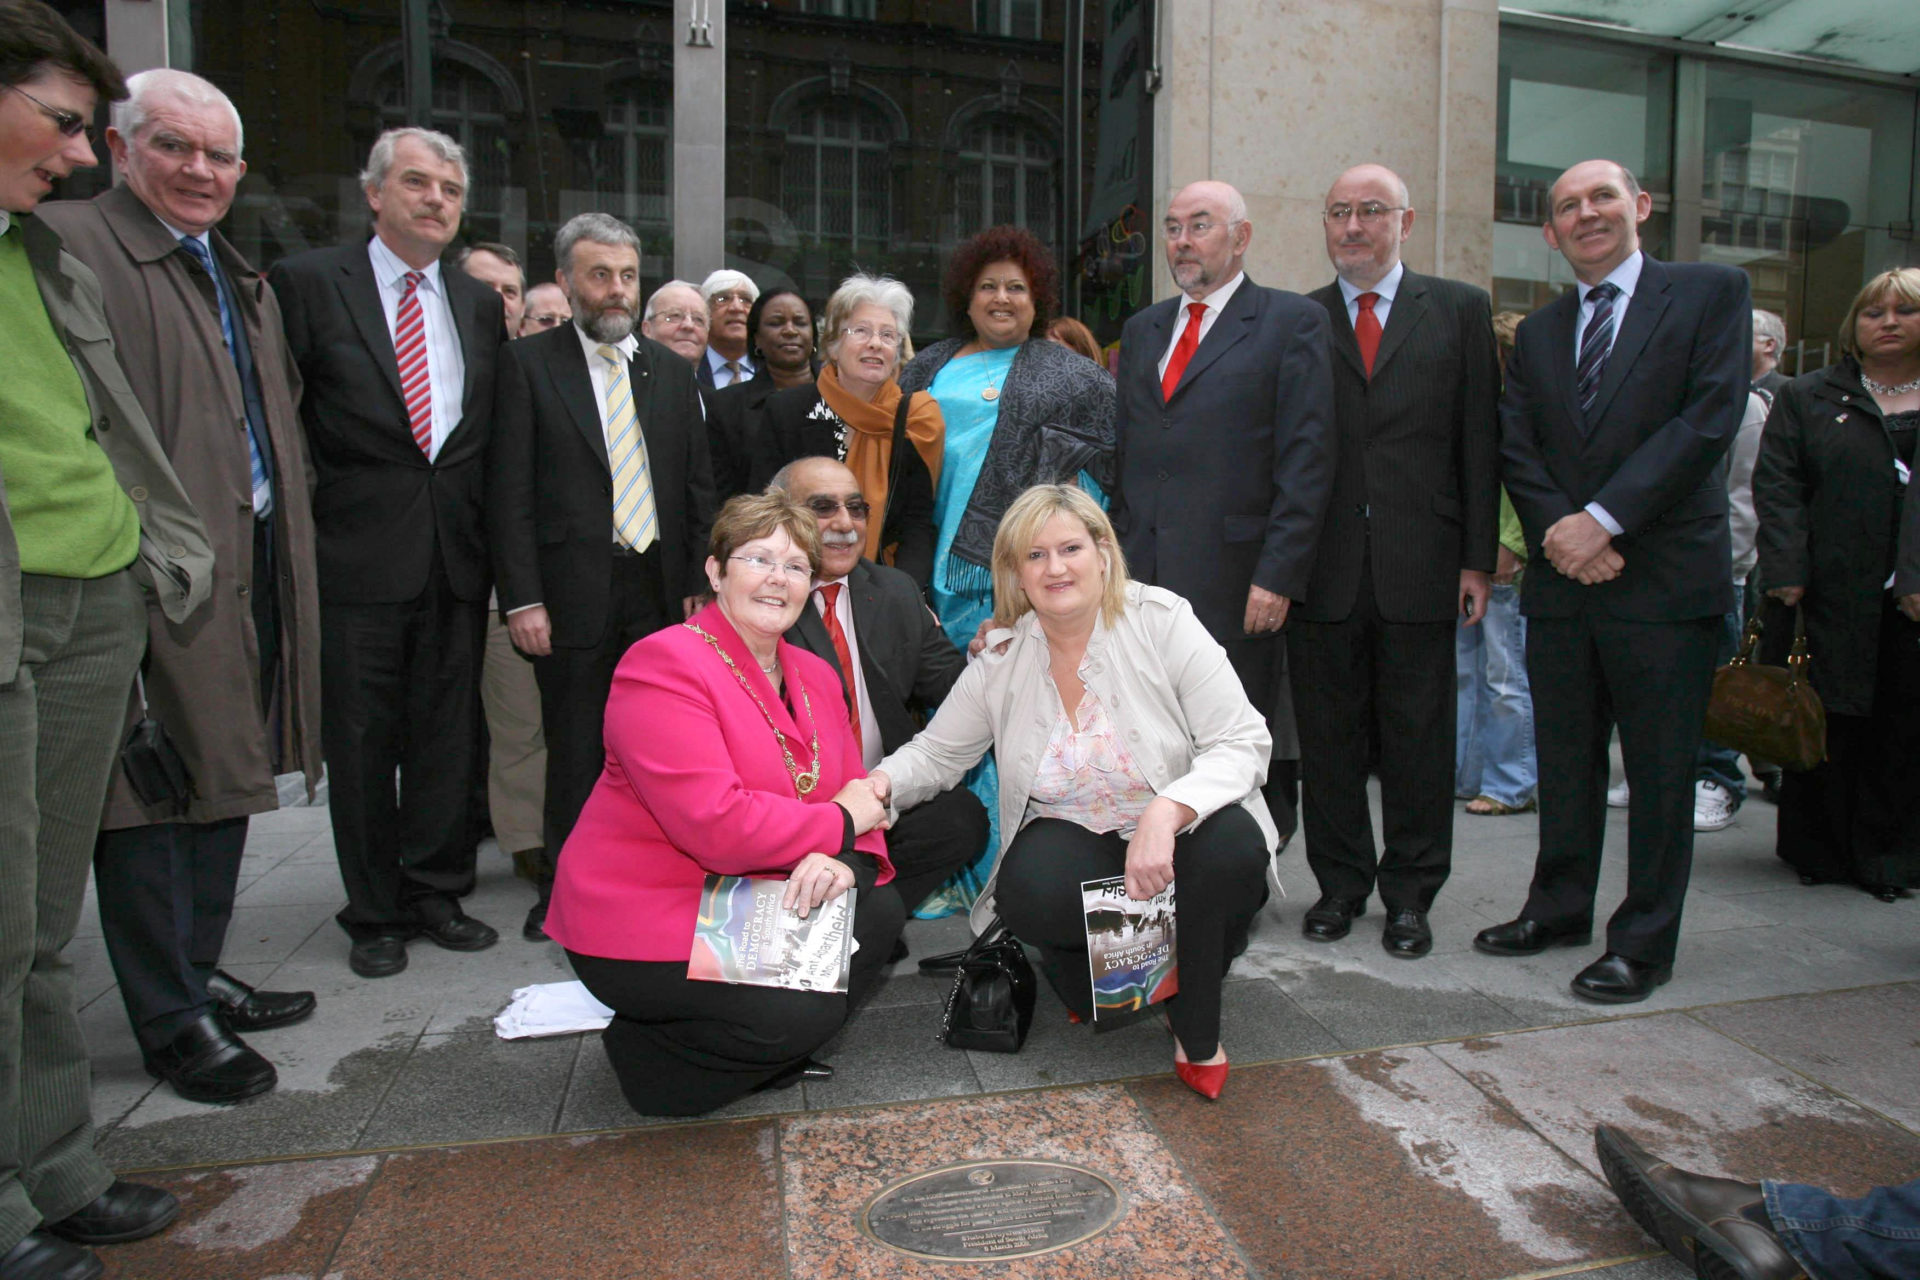  Dublin's Deputy Lord Mayor Anne Carter, Dr Kader Asmal and former Dunnes worker Mary Manning kneel next to a plaque commemorating a the anti-Apartheid Strike.